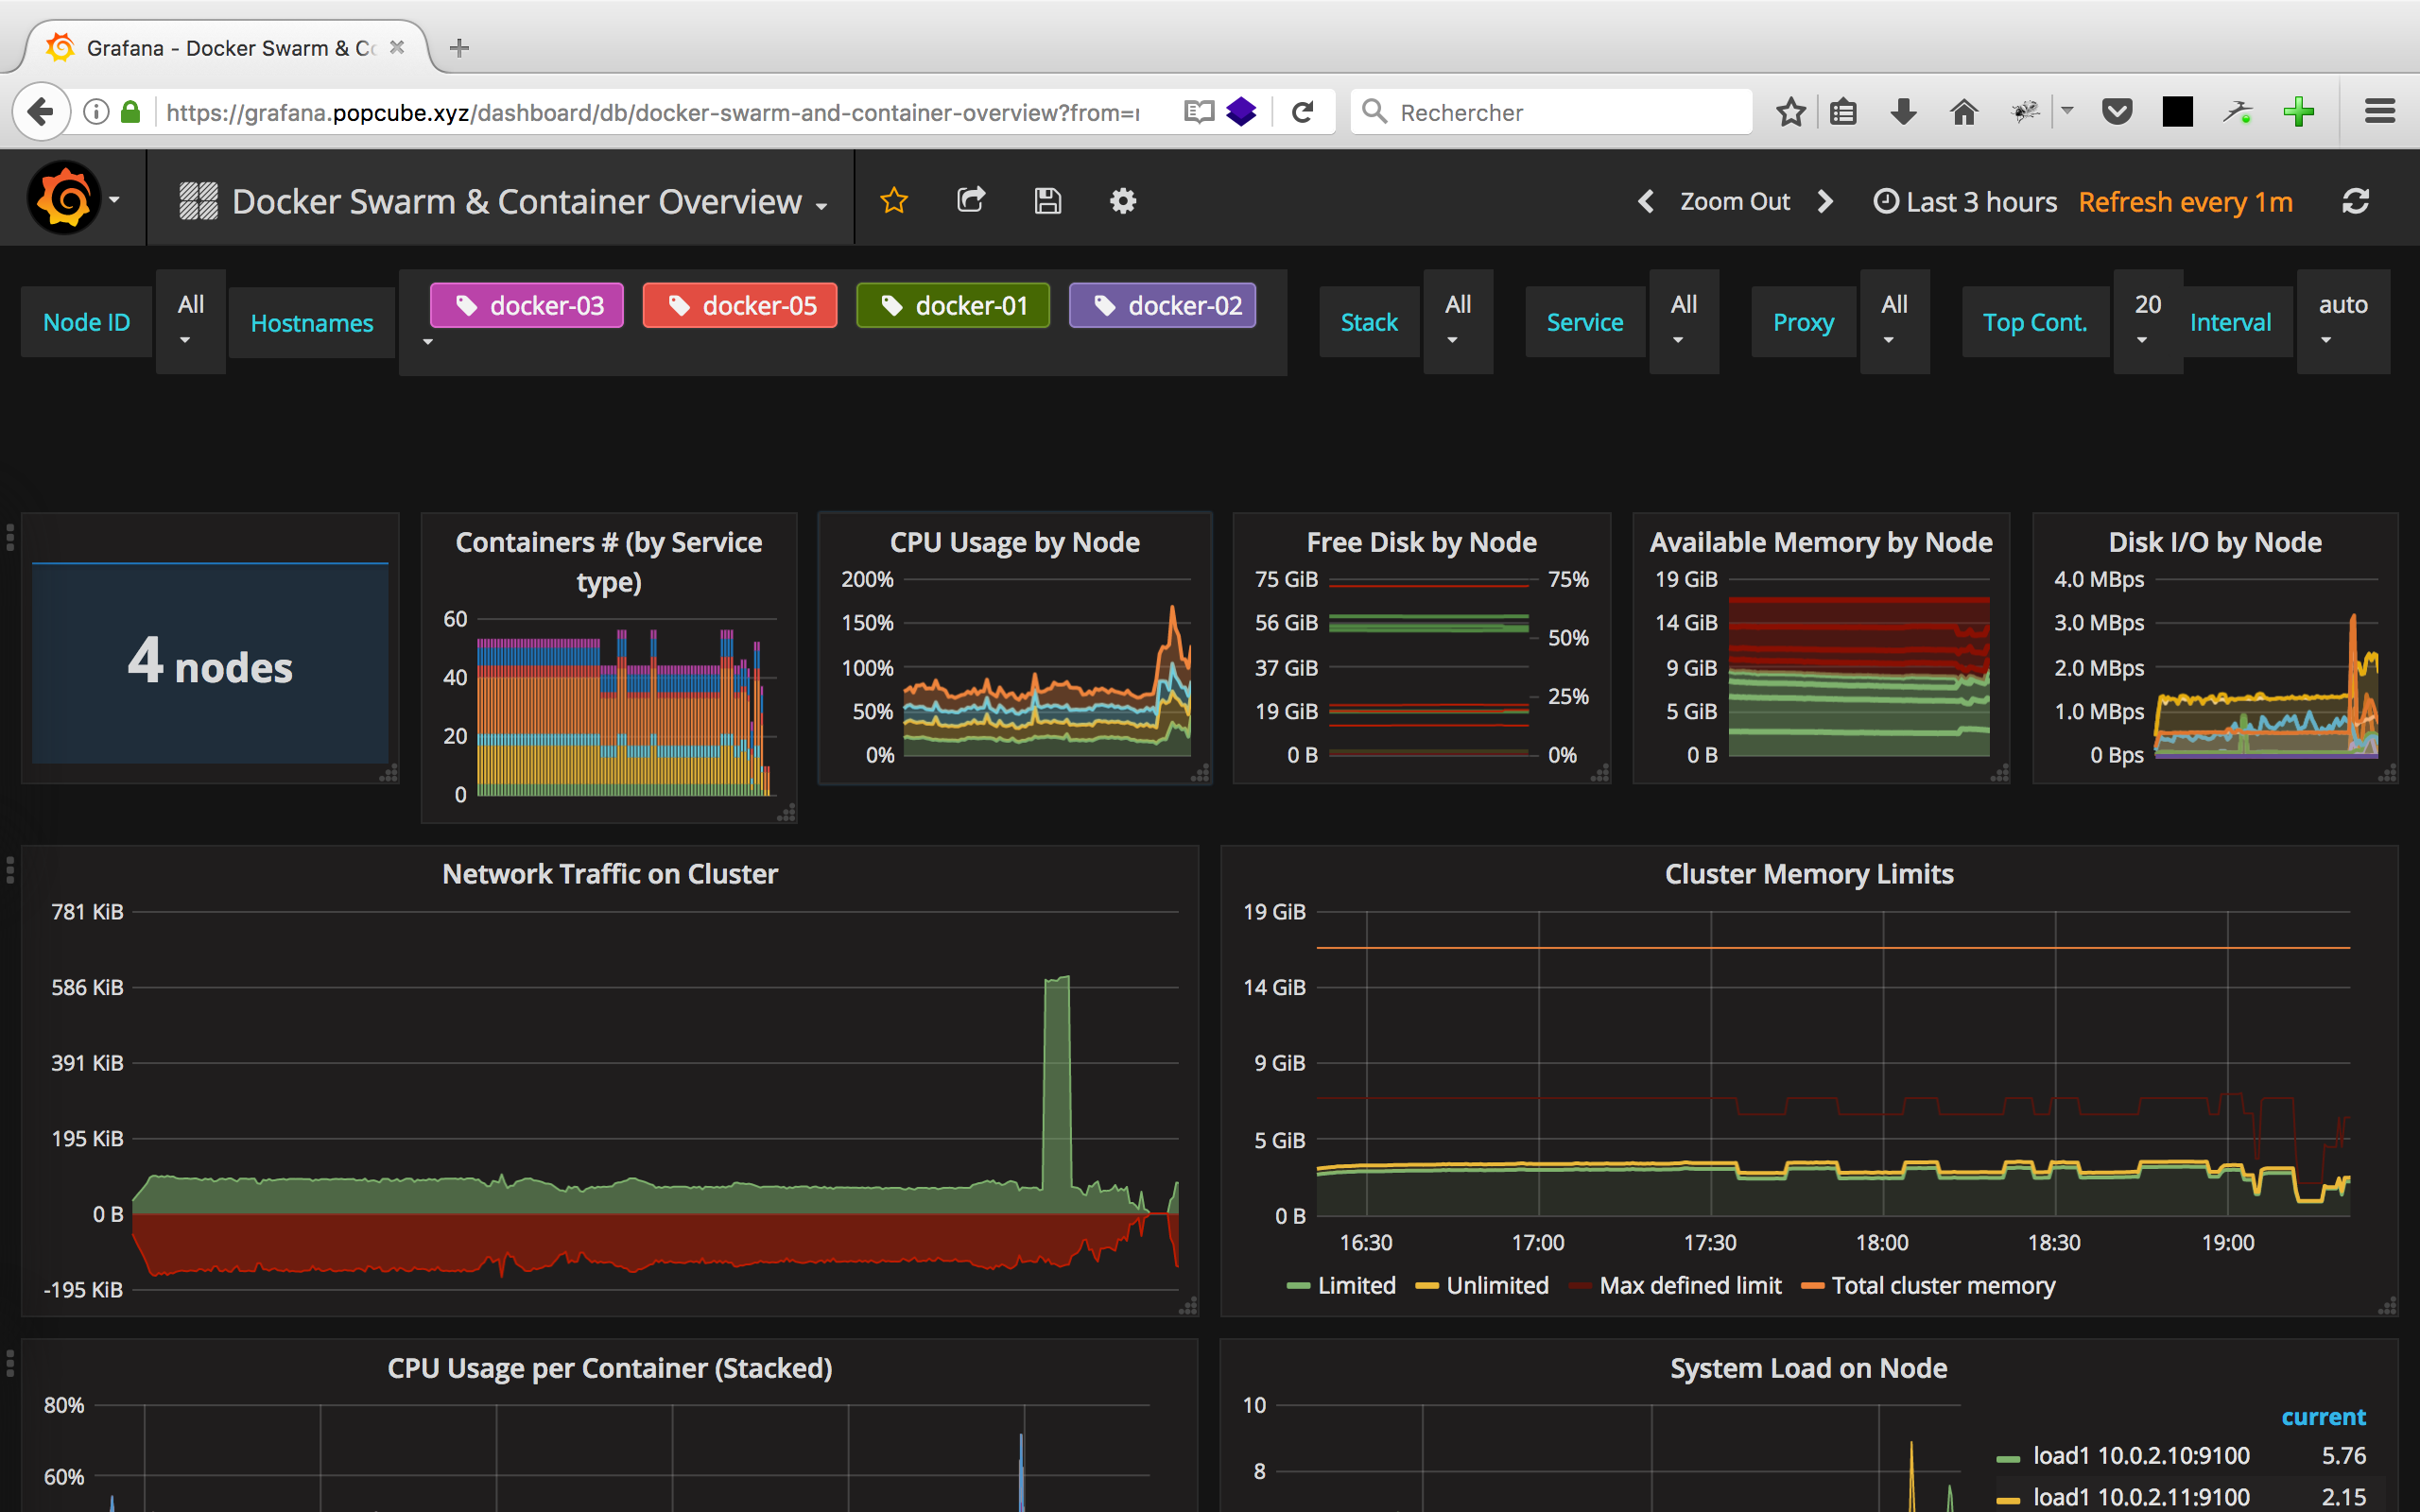 infrastructure/../../_static/infrastructure/monit/grafana_1.png